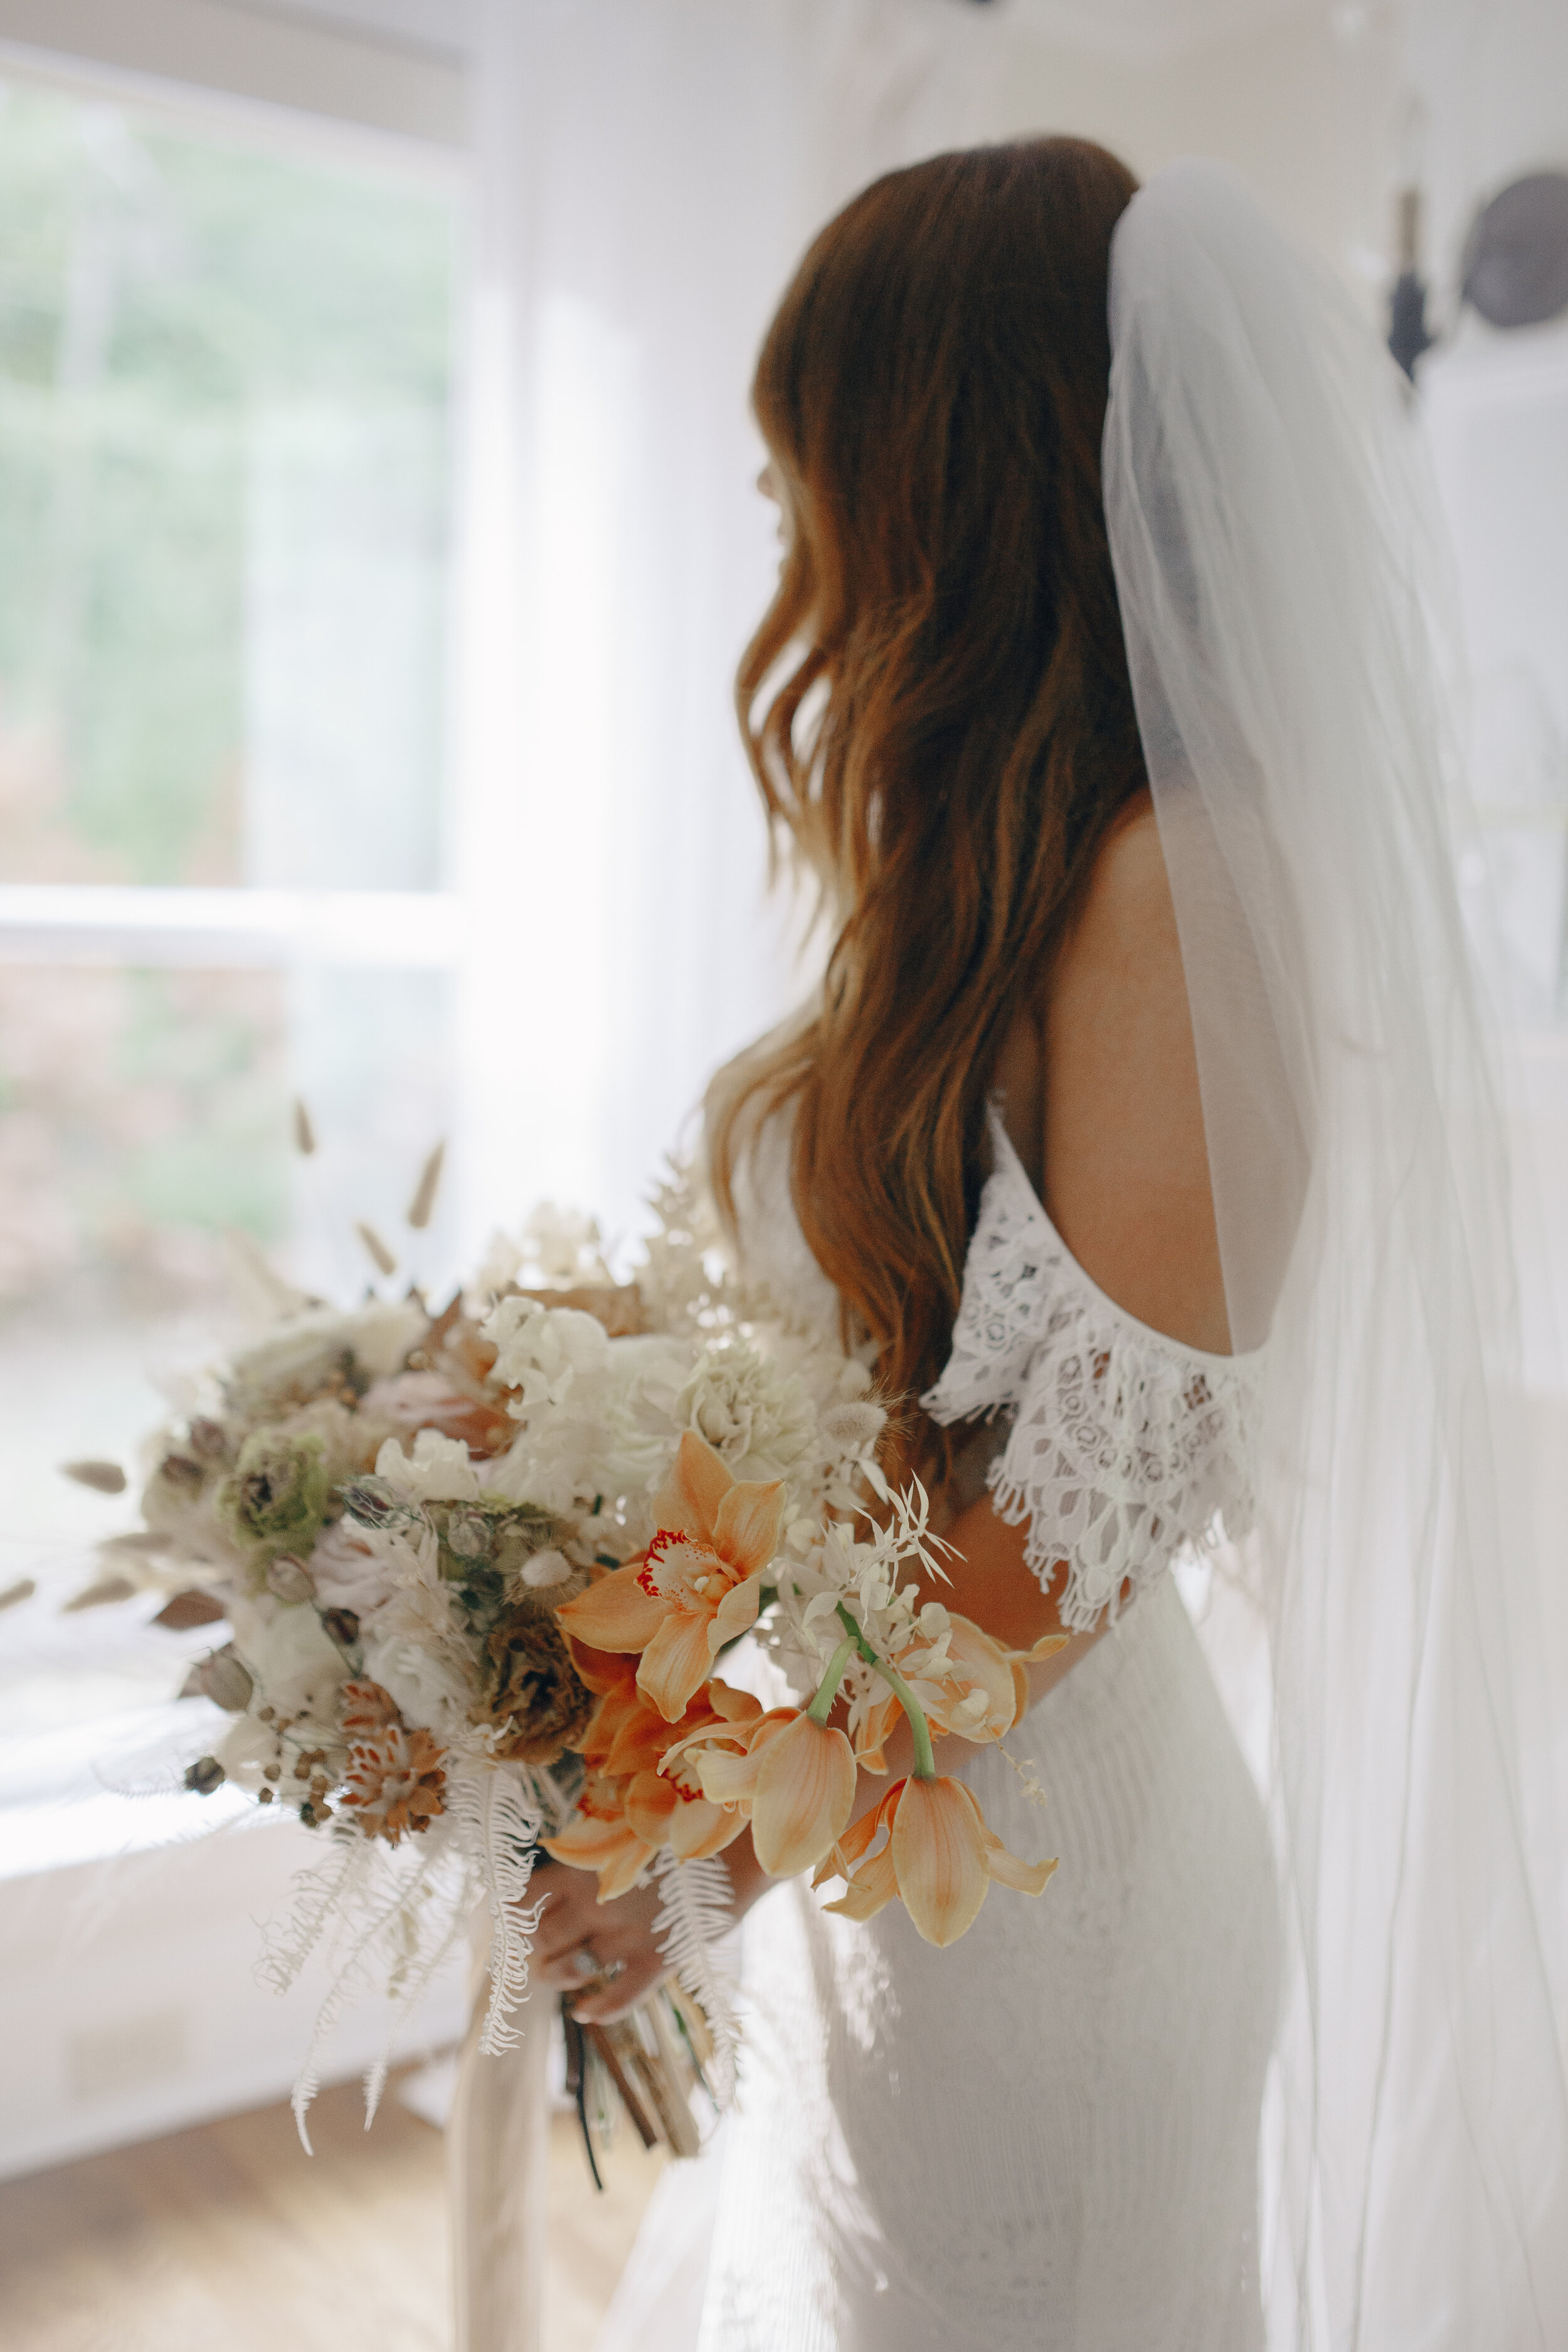 Lush, bohemian bridal bouquet with white garden roses, copper orchids, dried white ferns, earthy textures, and toffee lisianthus. Nashville wedding and elopement floral designer.